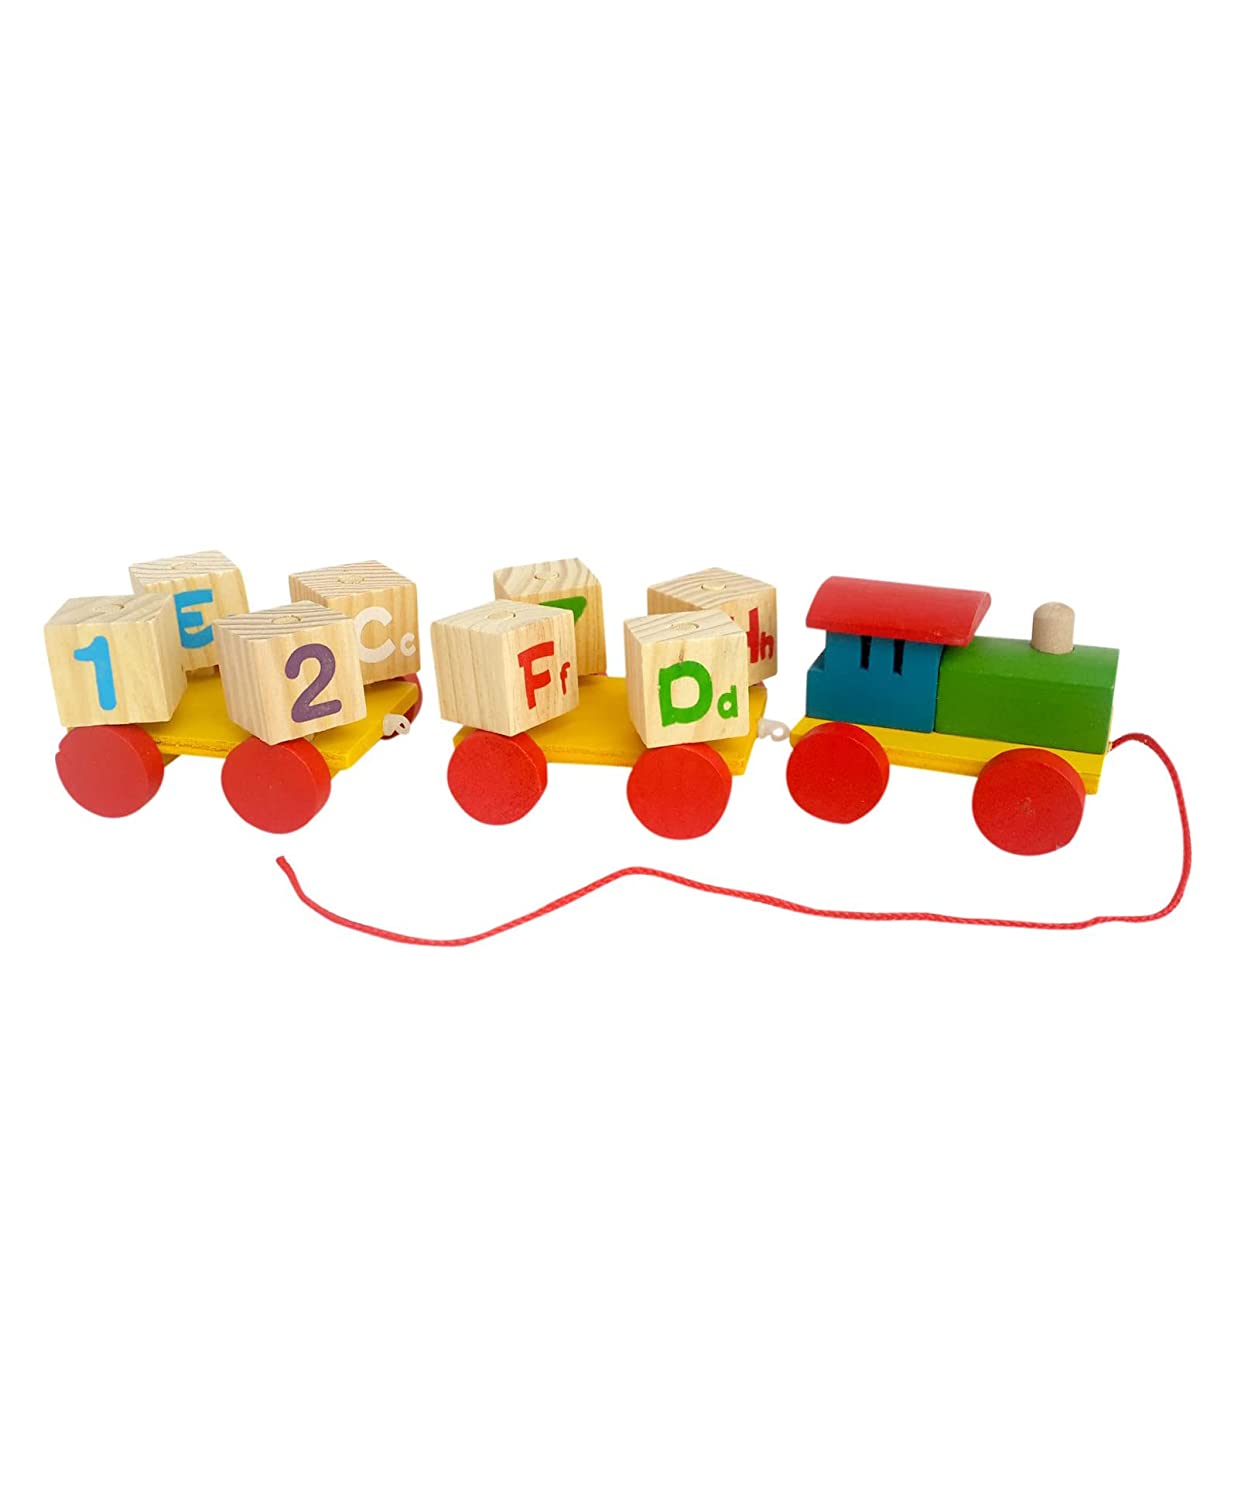 Train Toys, Pull Along Train Toys For Kids, Whirlwind Three Carriage Train Wooden Toy Alphabet & Number